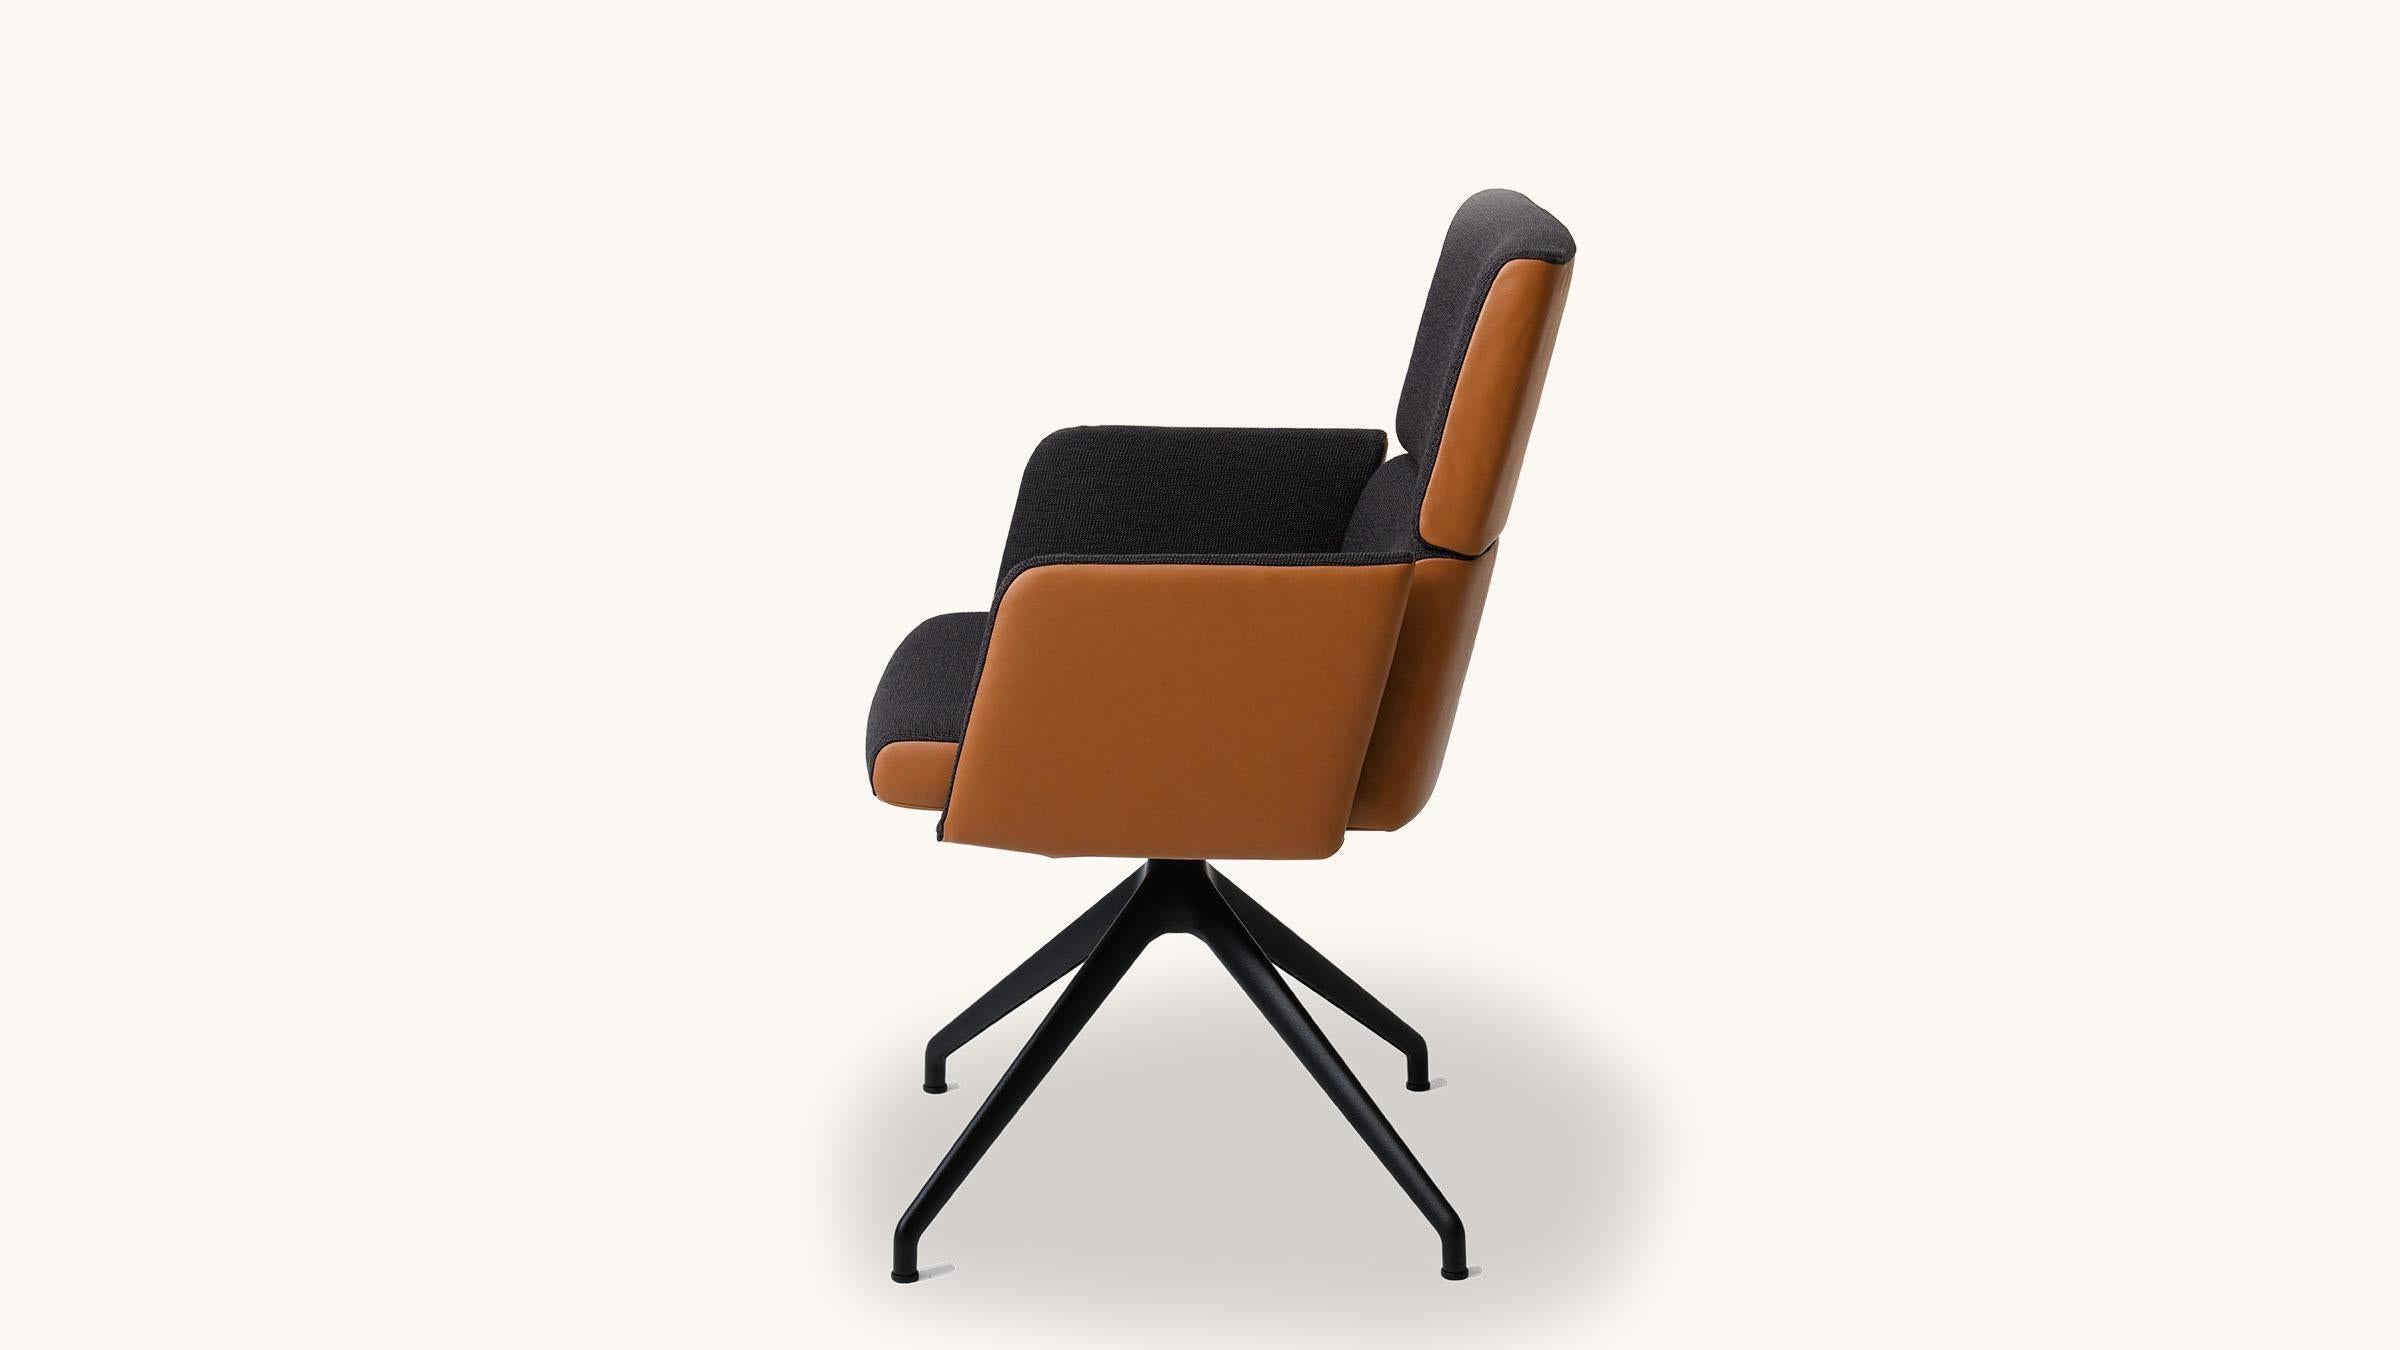 When the little brother suddenly grows up DS-414 is a chair that follows the movements of the person seated and provides noticeable support for the sitting posture: sitting has never been so healthy – no wonder, since the model is based on a novel